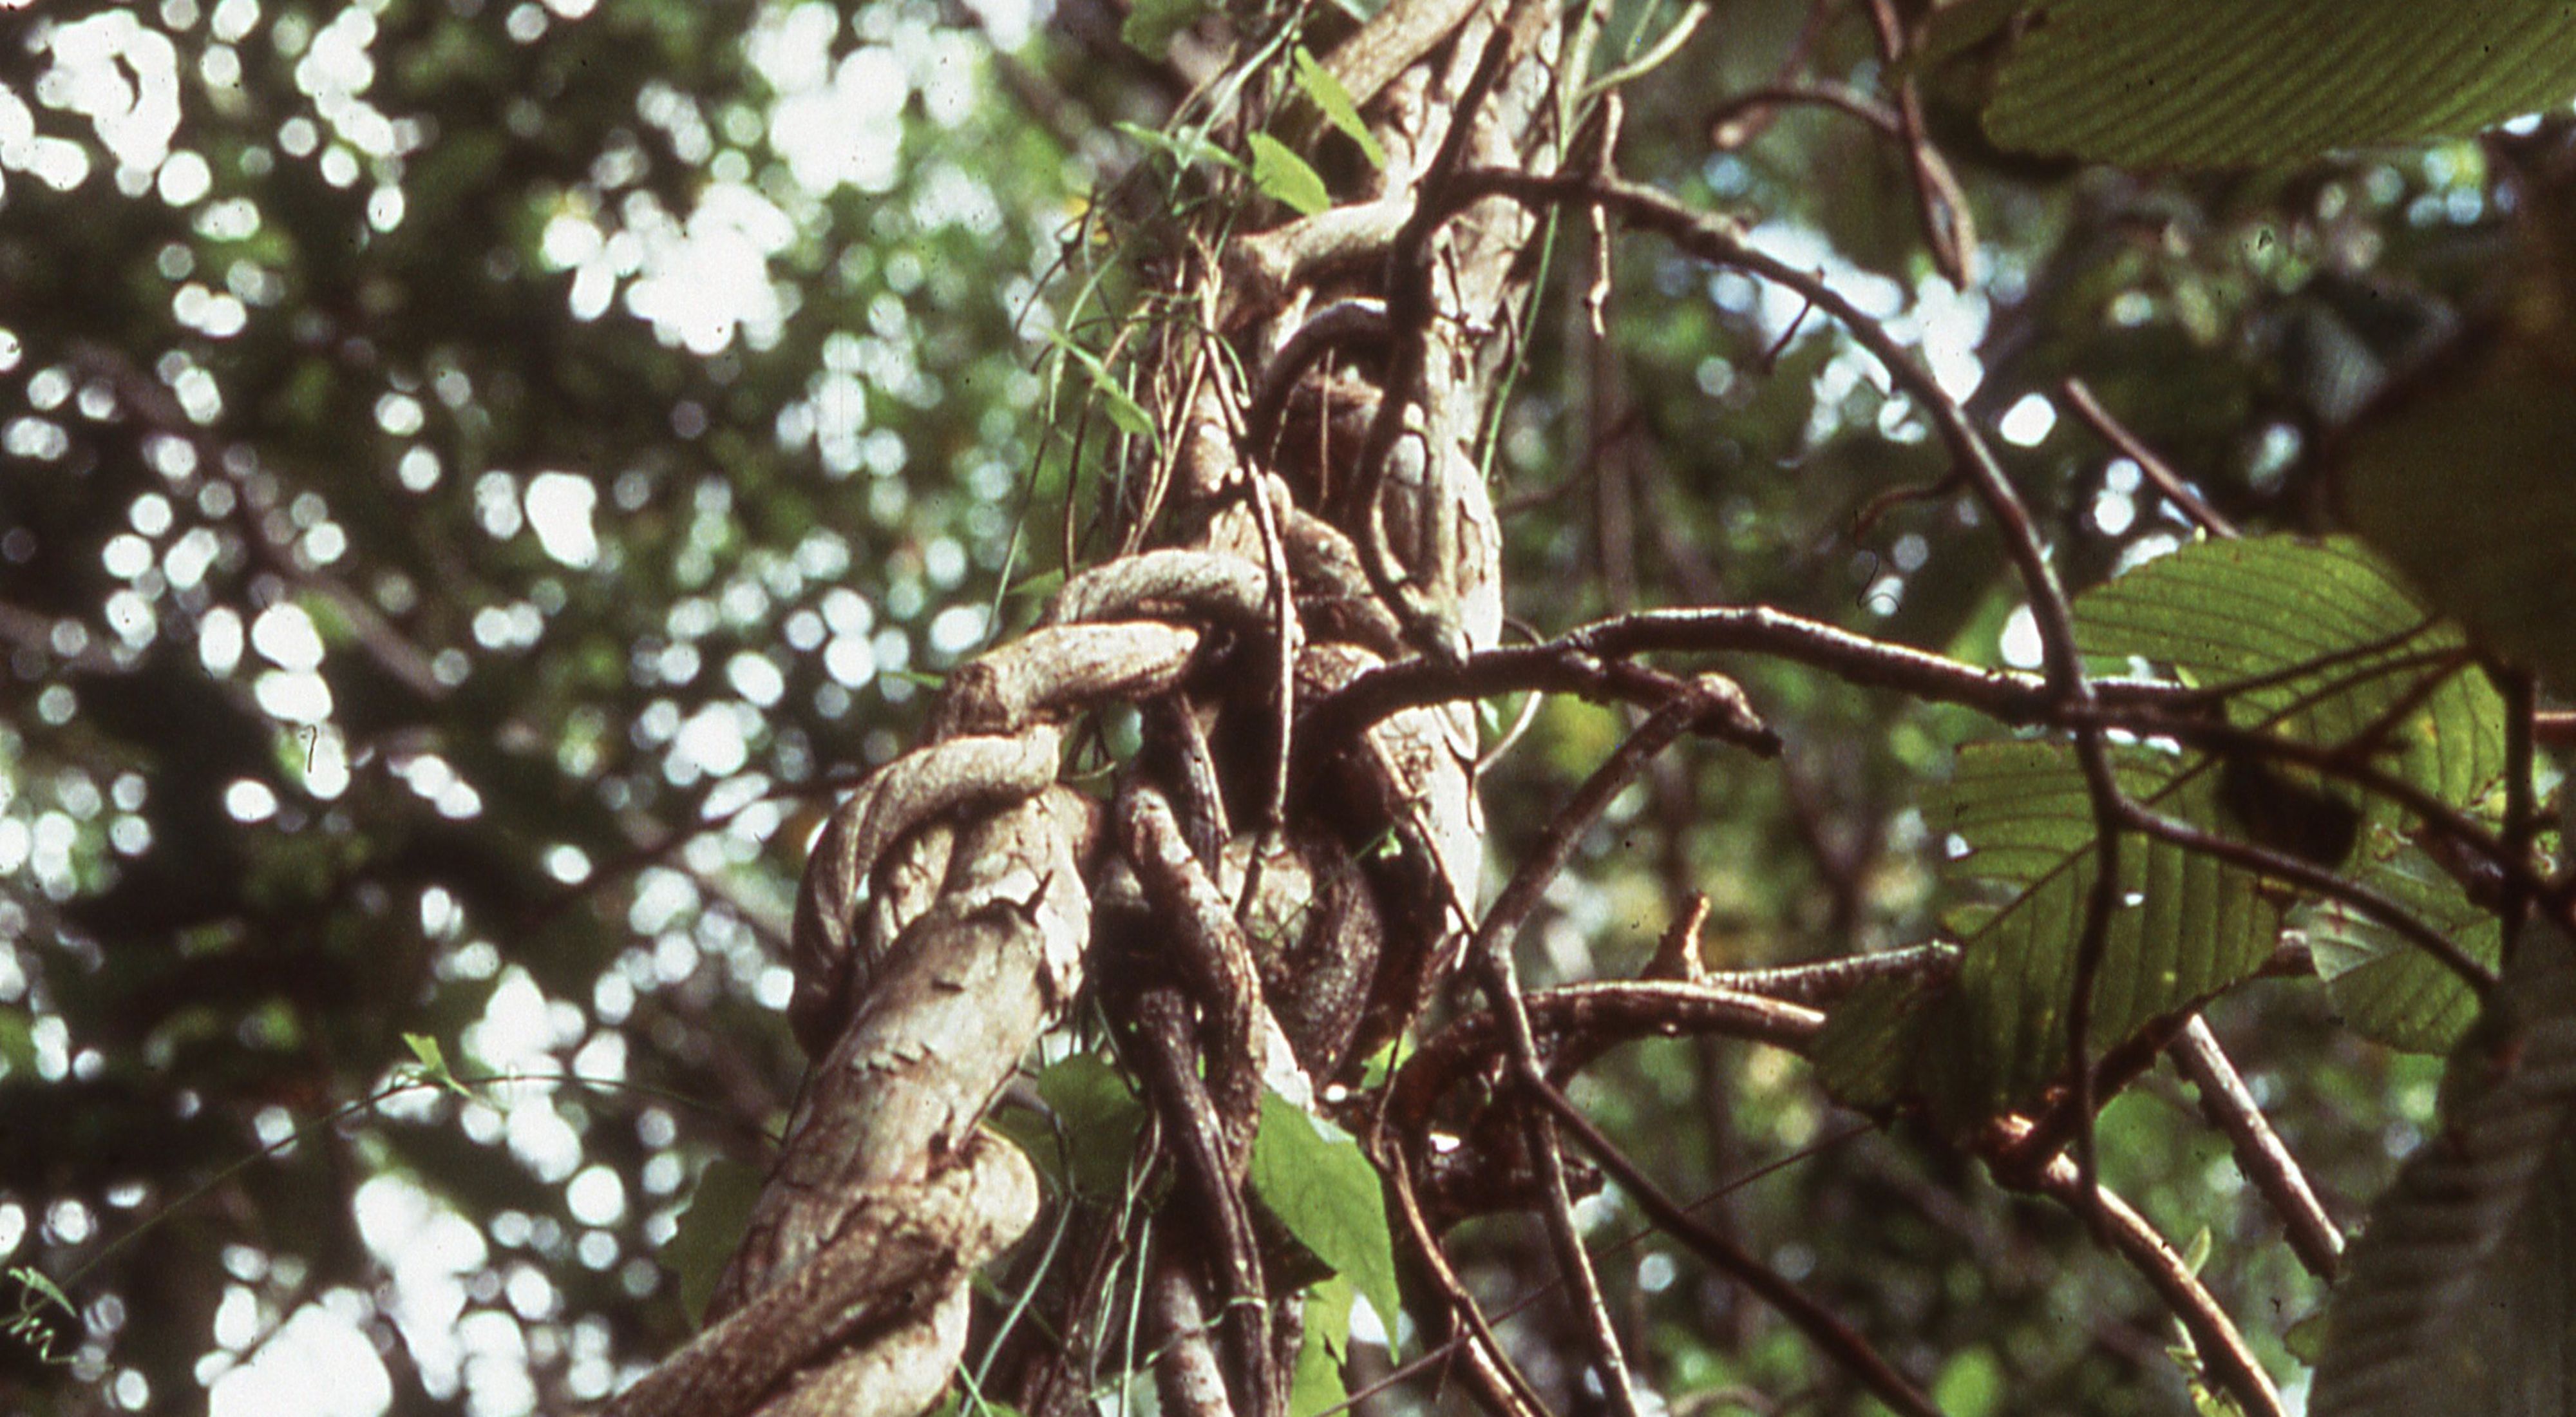 woody vines wrap around a tree in the forest.